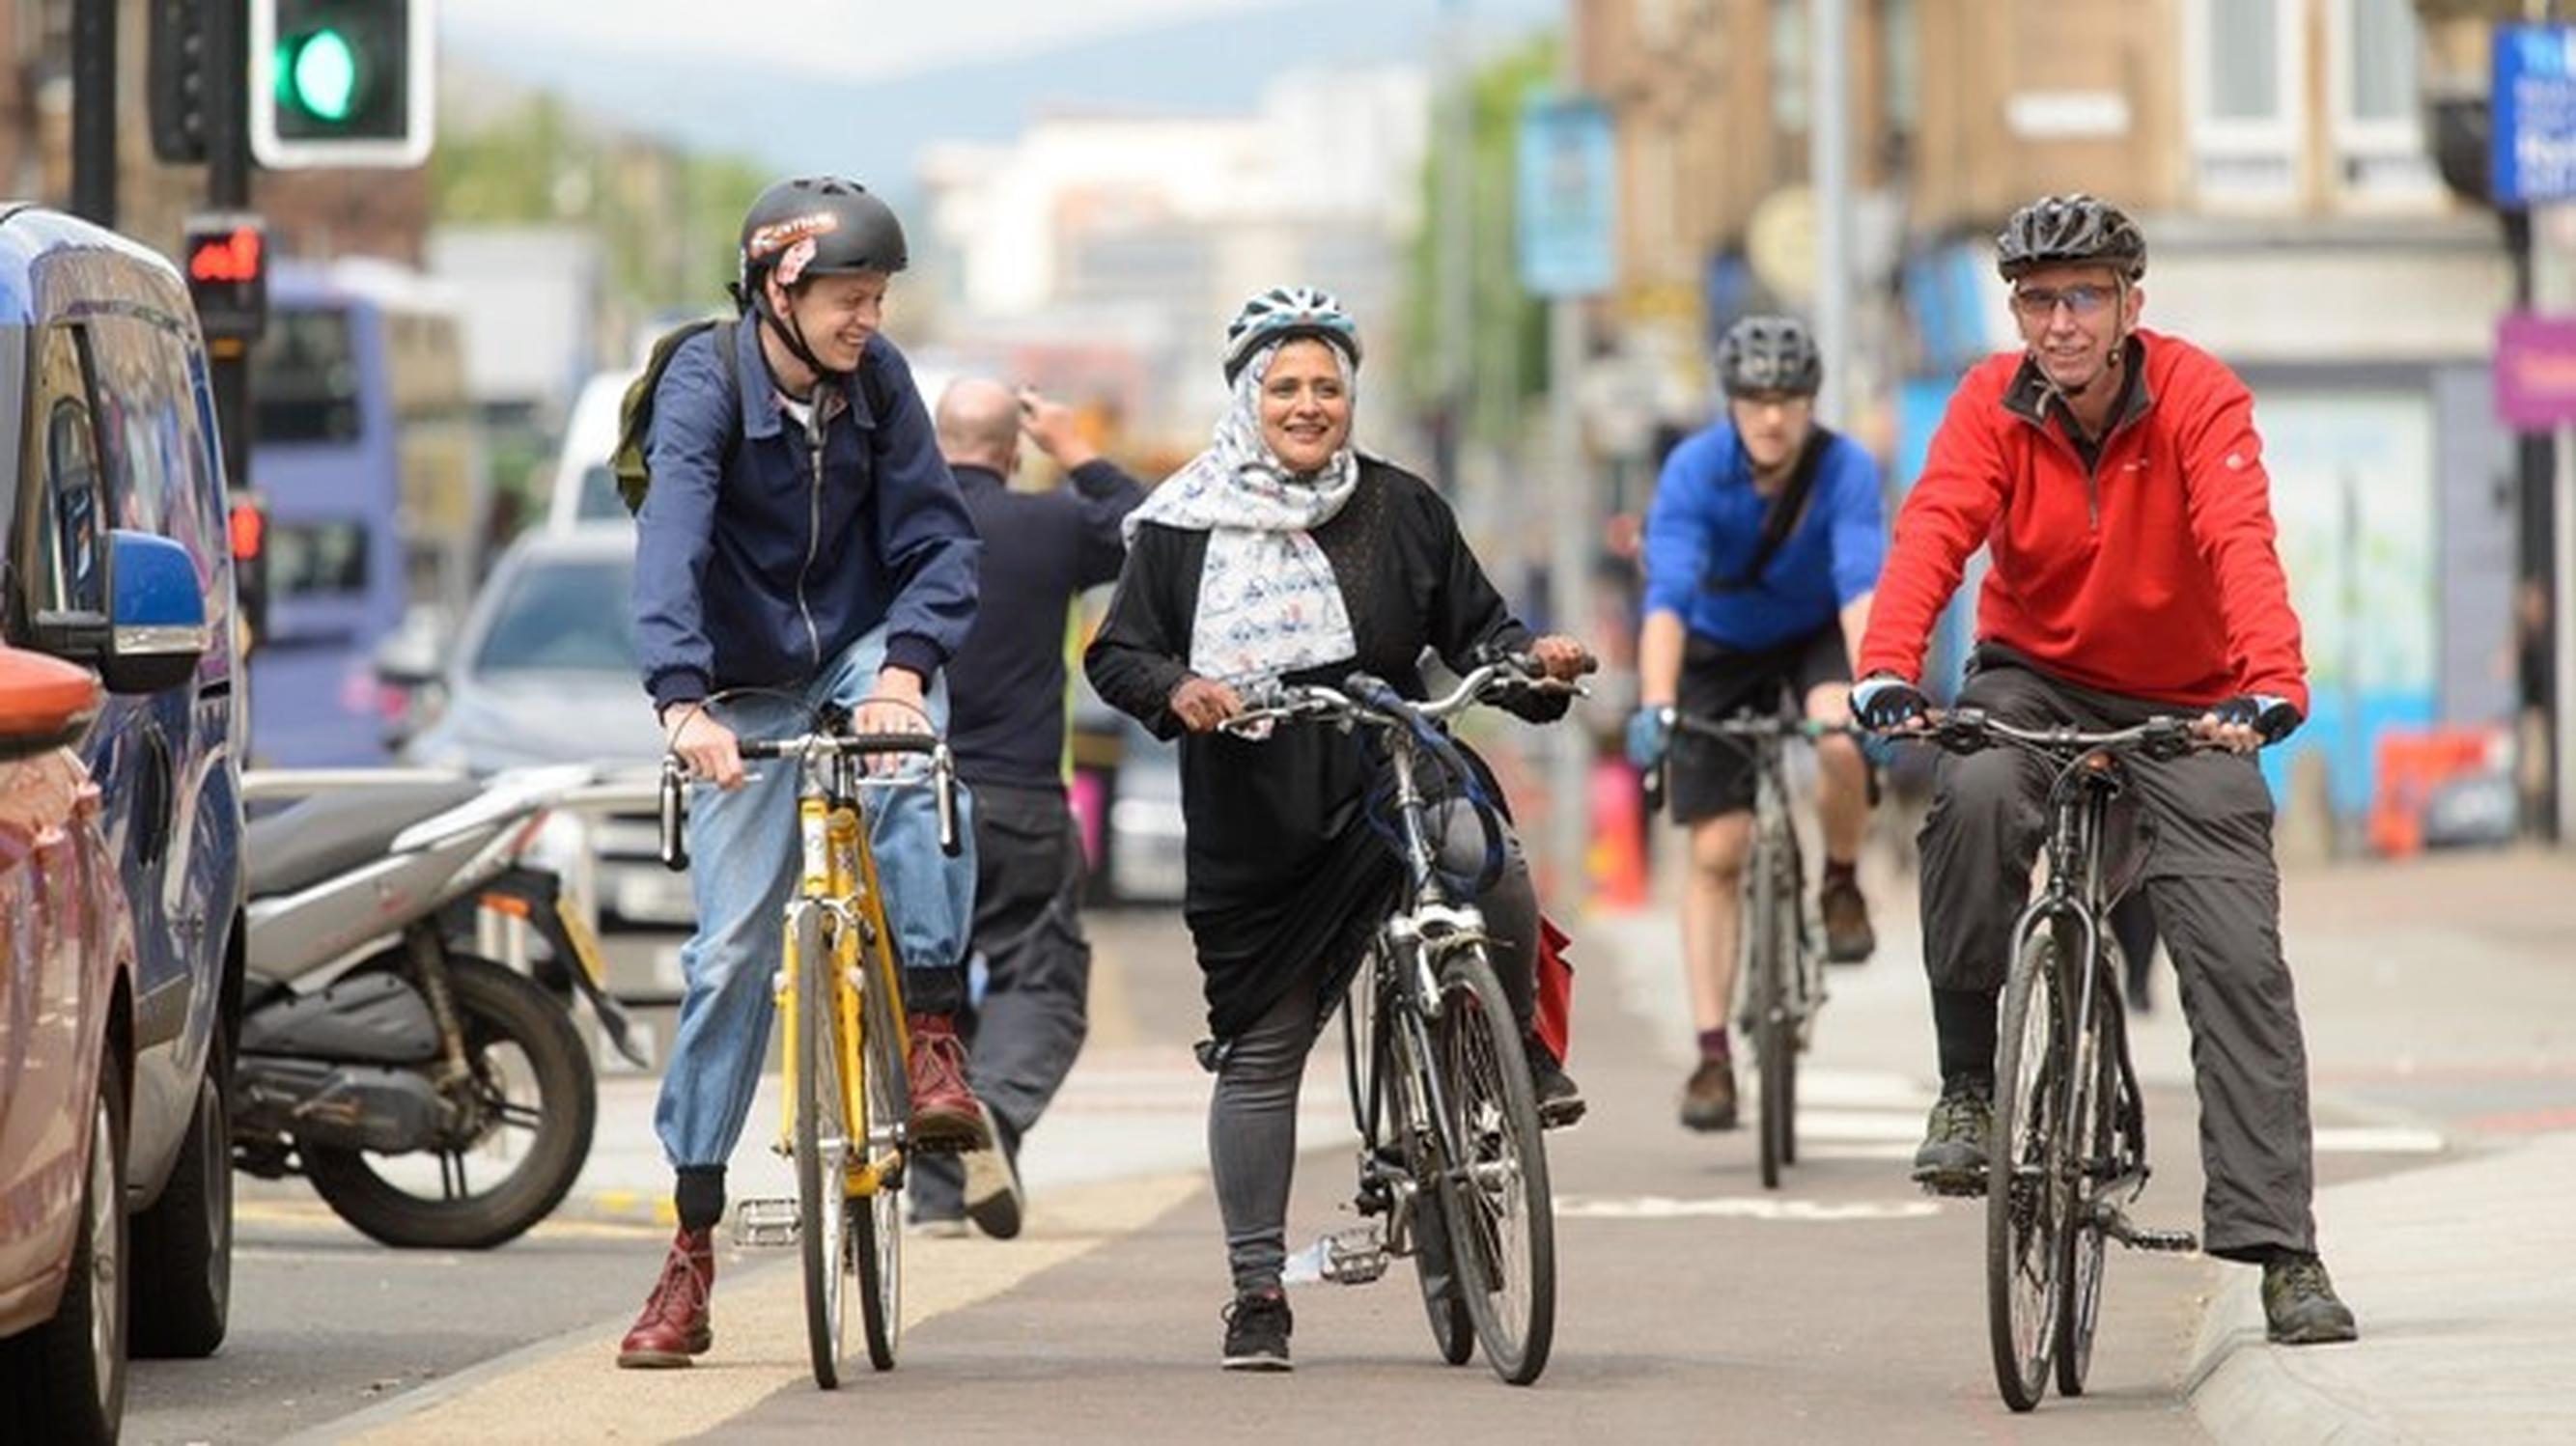 Cycling will soon be available on prescription (Sustrans)